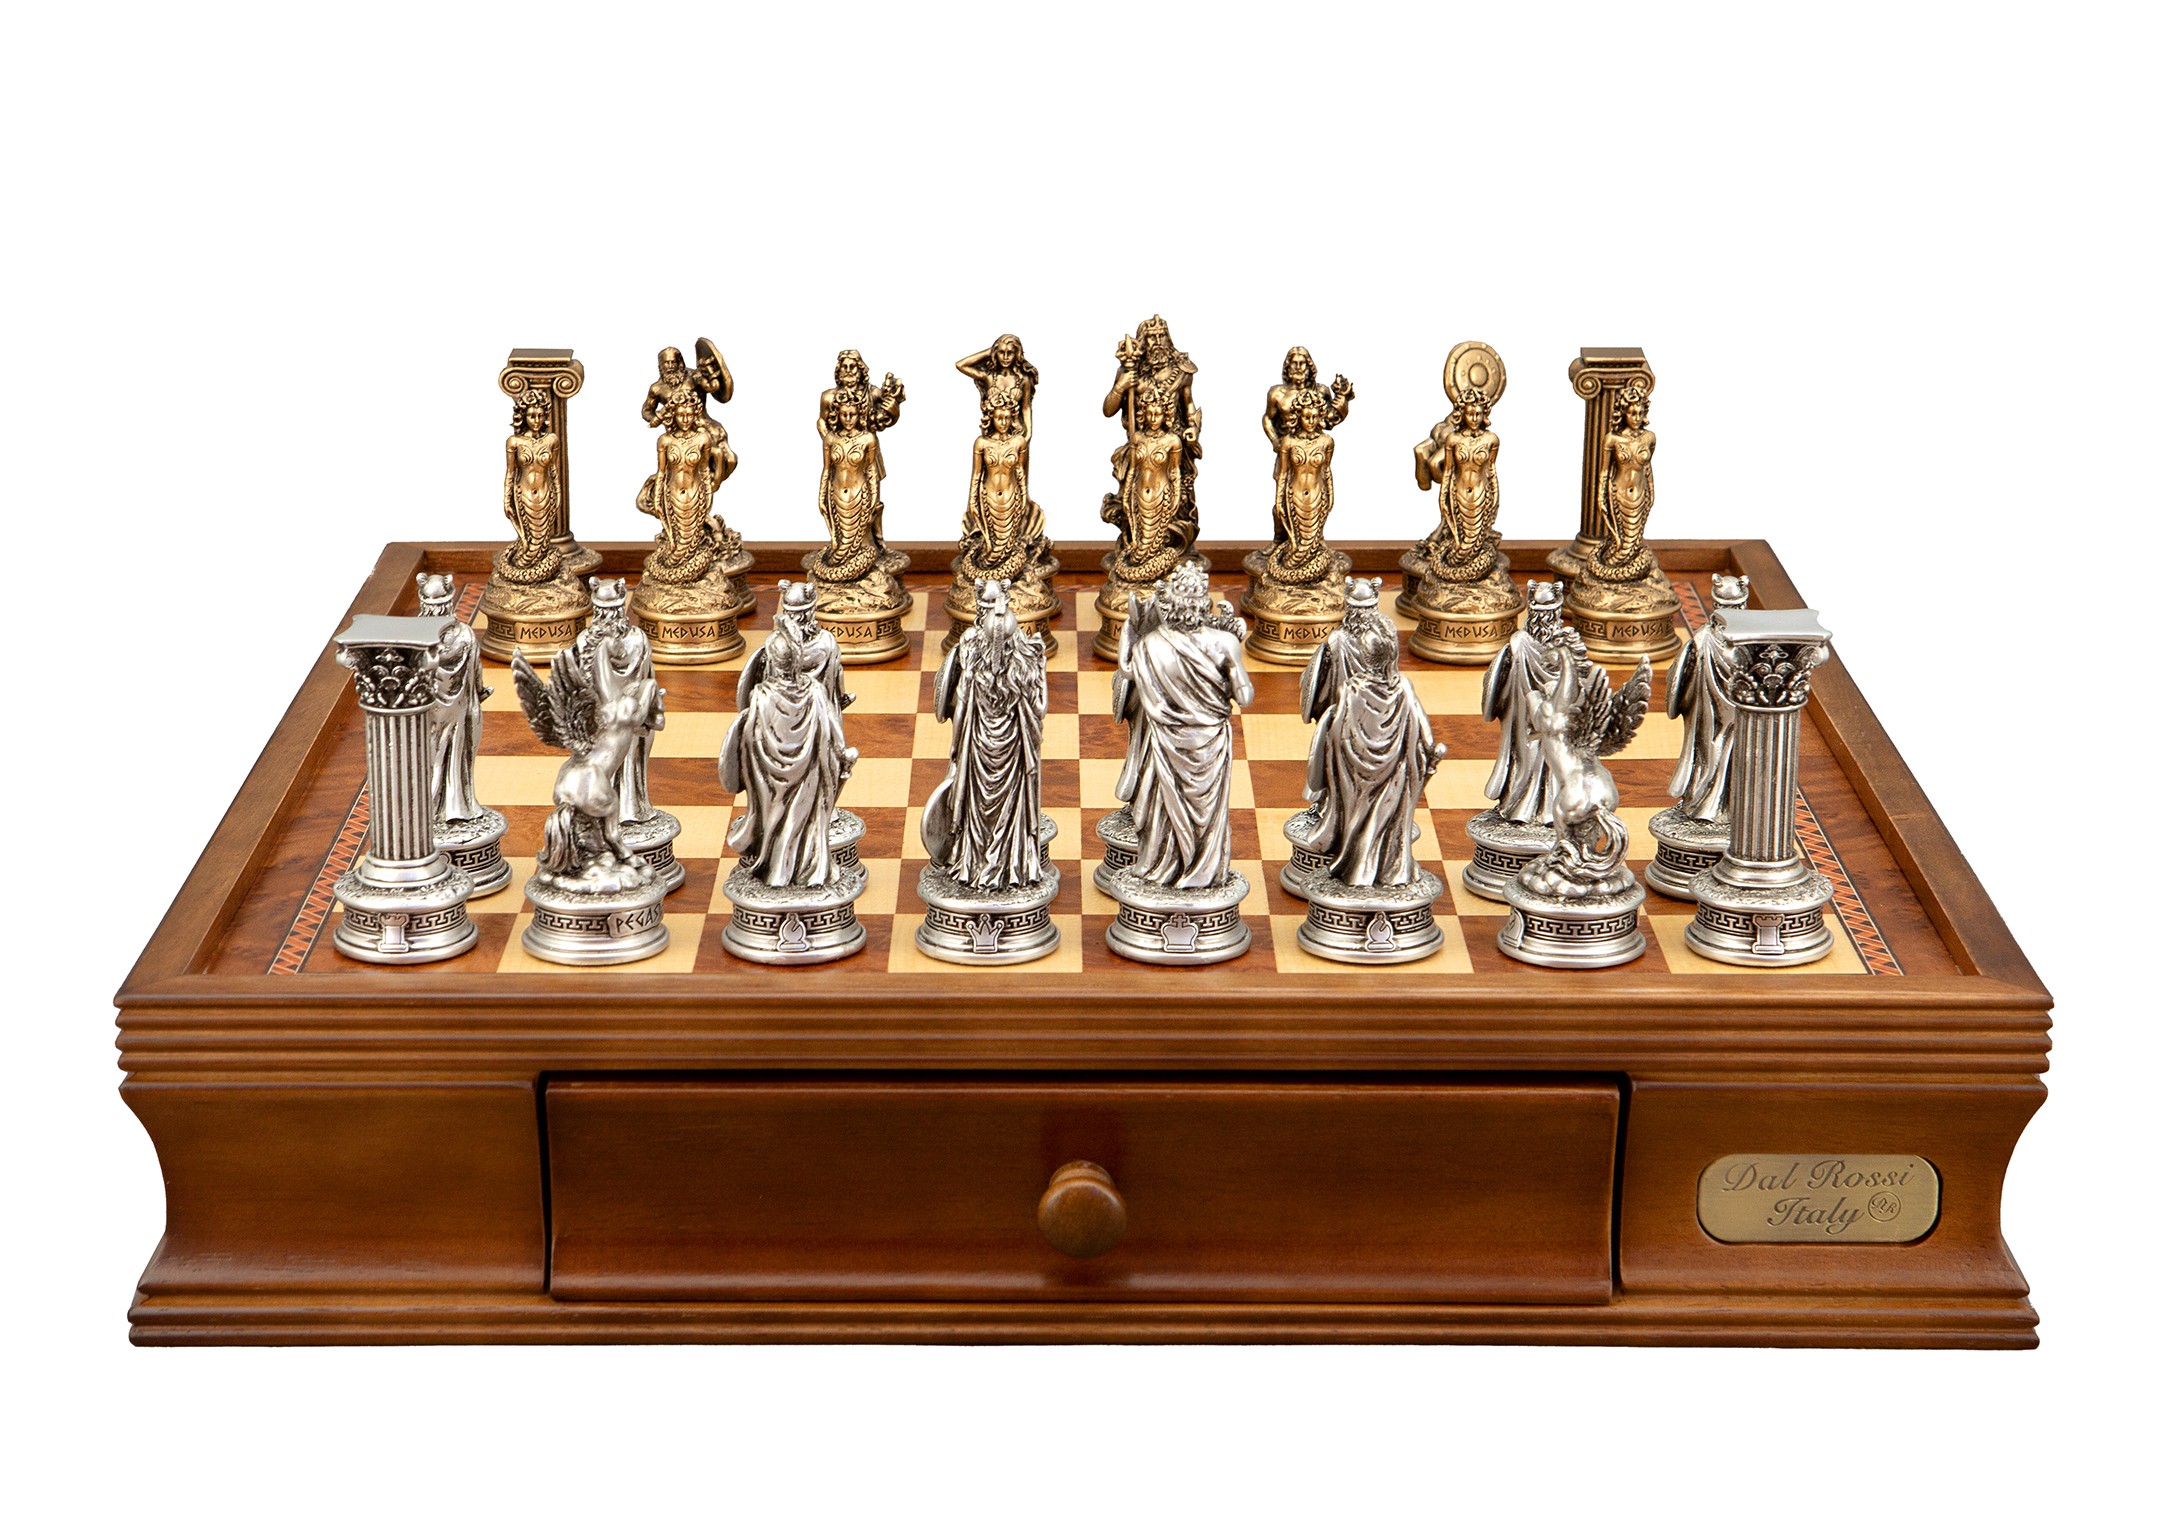 Dal Rossi Italy European Warriors Chessmen 85mm on a Walnut Chess Box with Drawers 16"